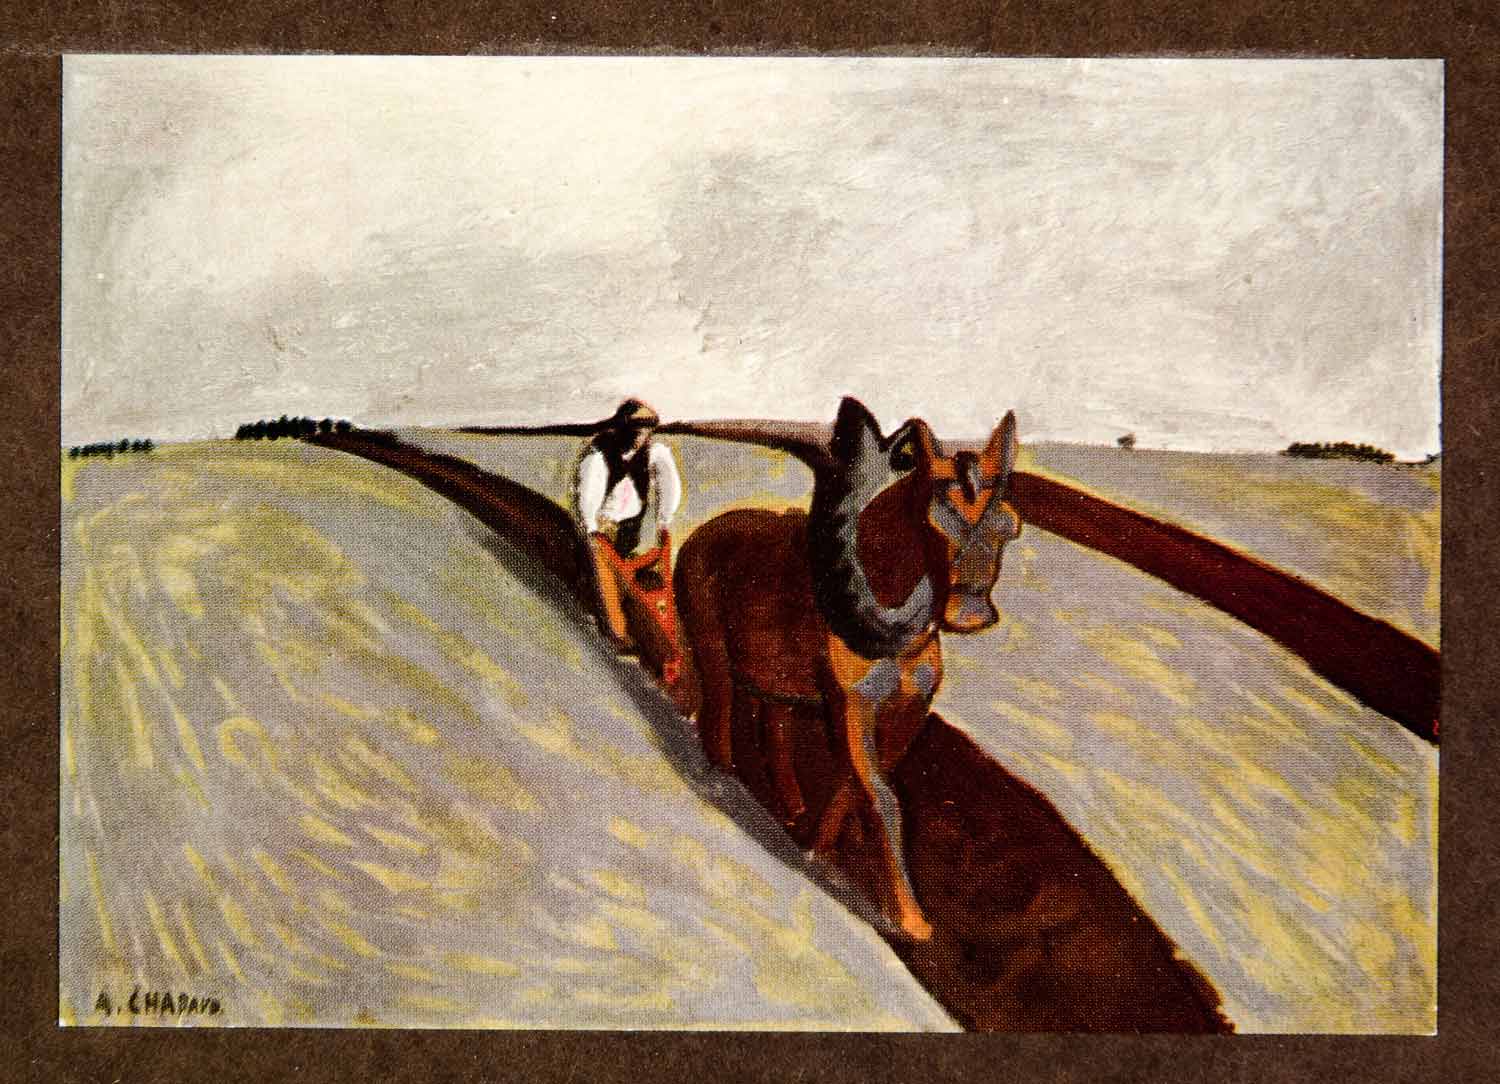 1914 Print Laborer Auguste Chabaud Horse Plow Agriculture Post XAFA2